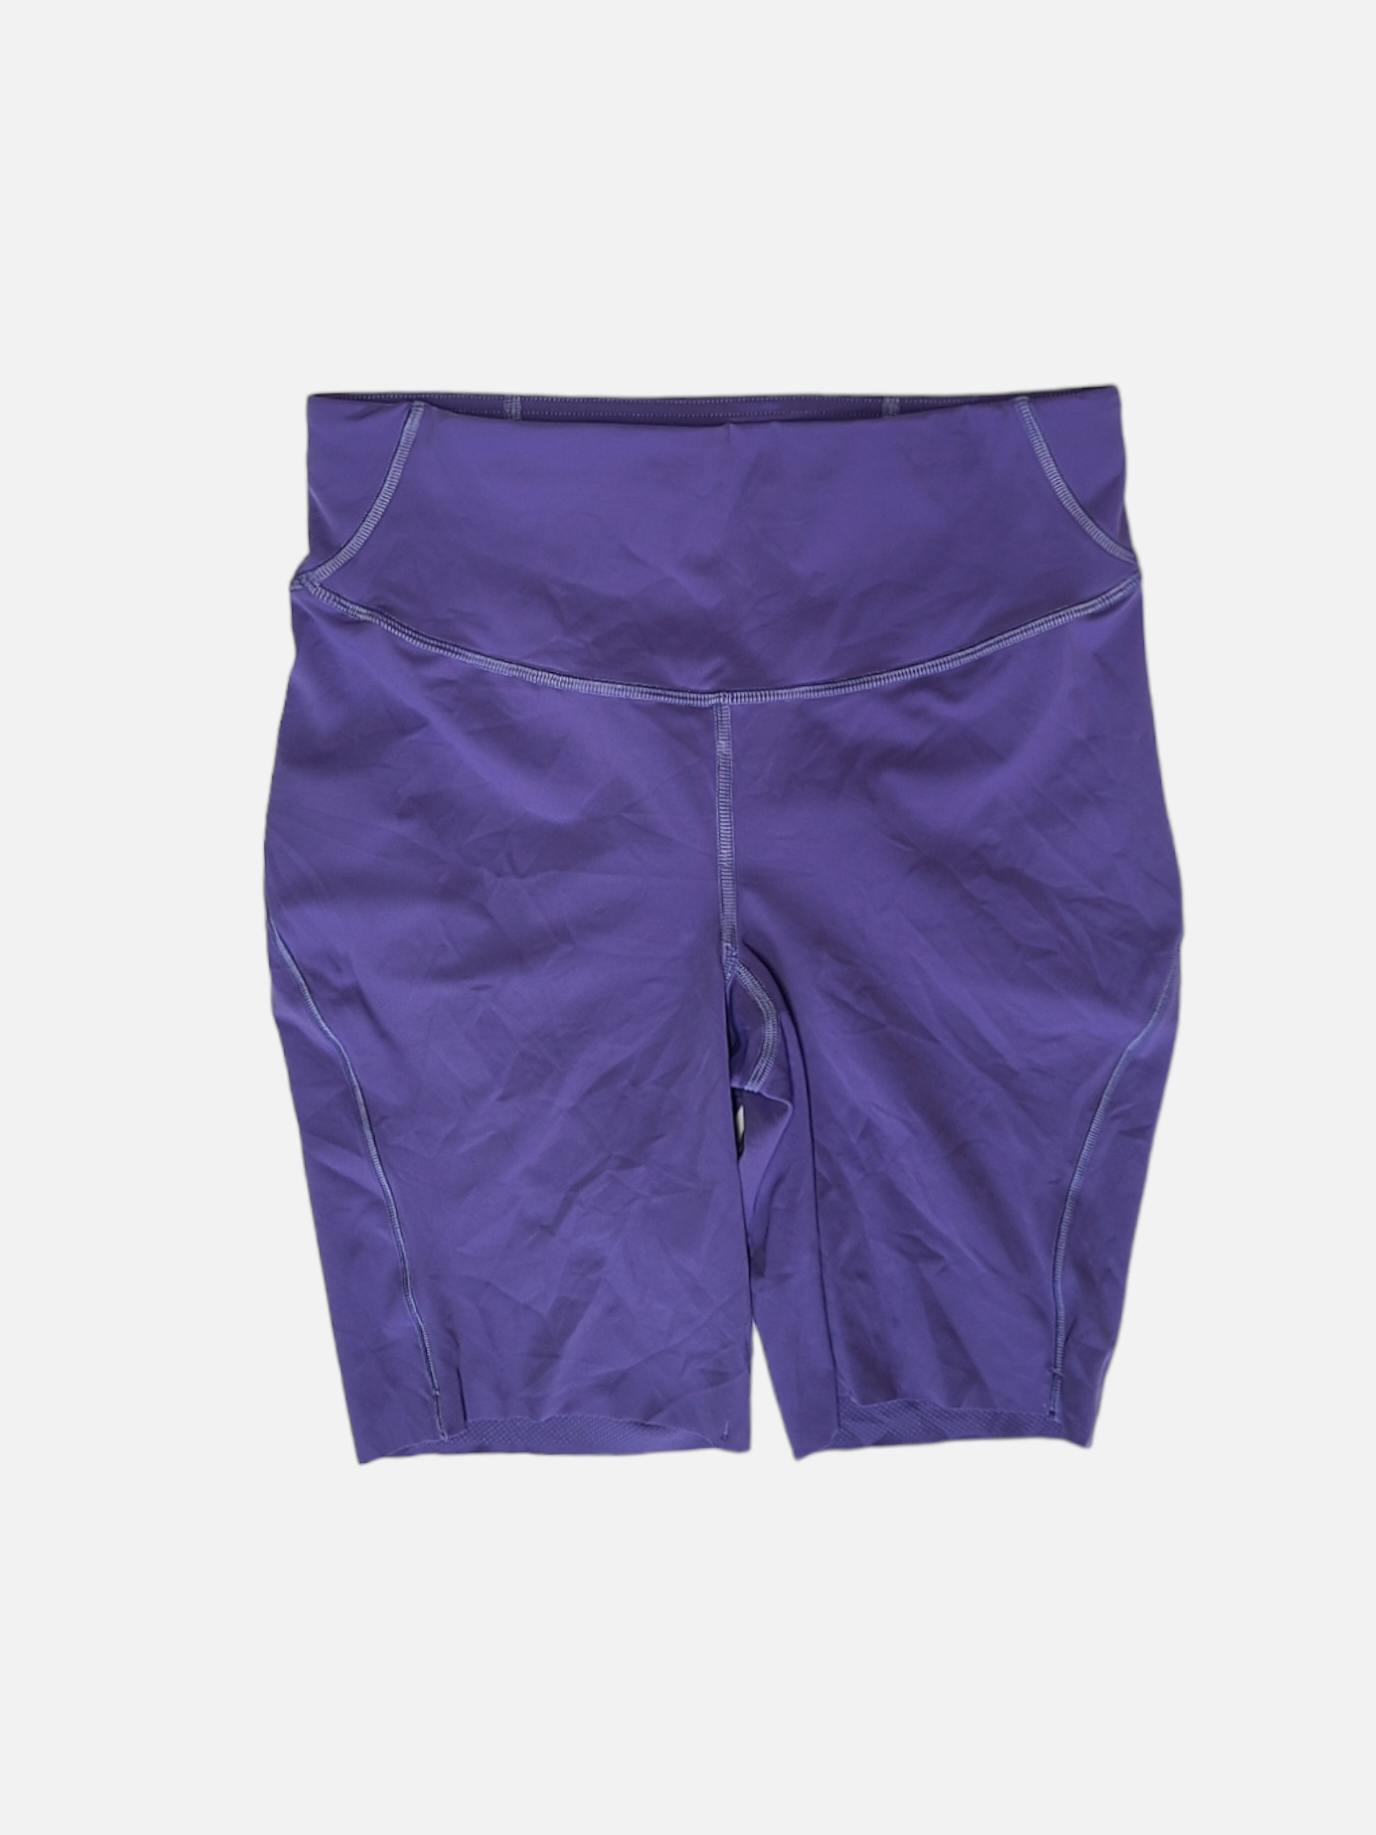 Lululemon Base Pace 8 Short NWT 8 Sold out color